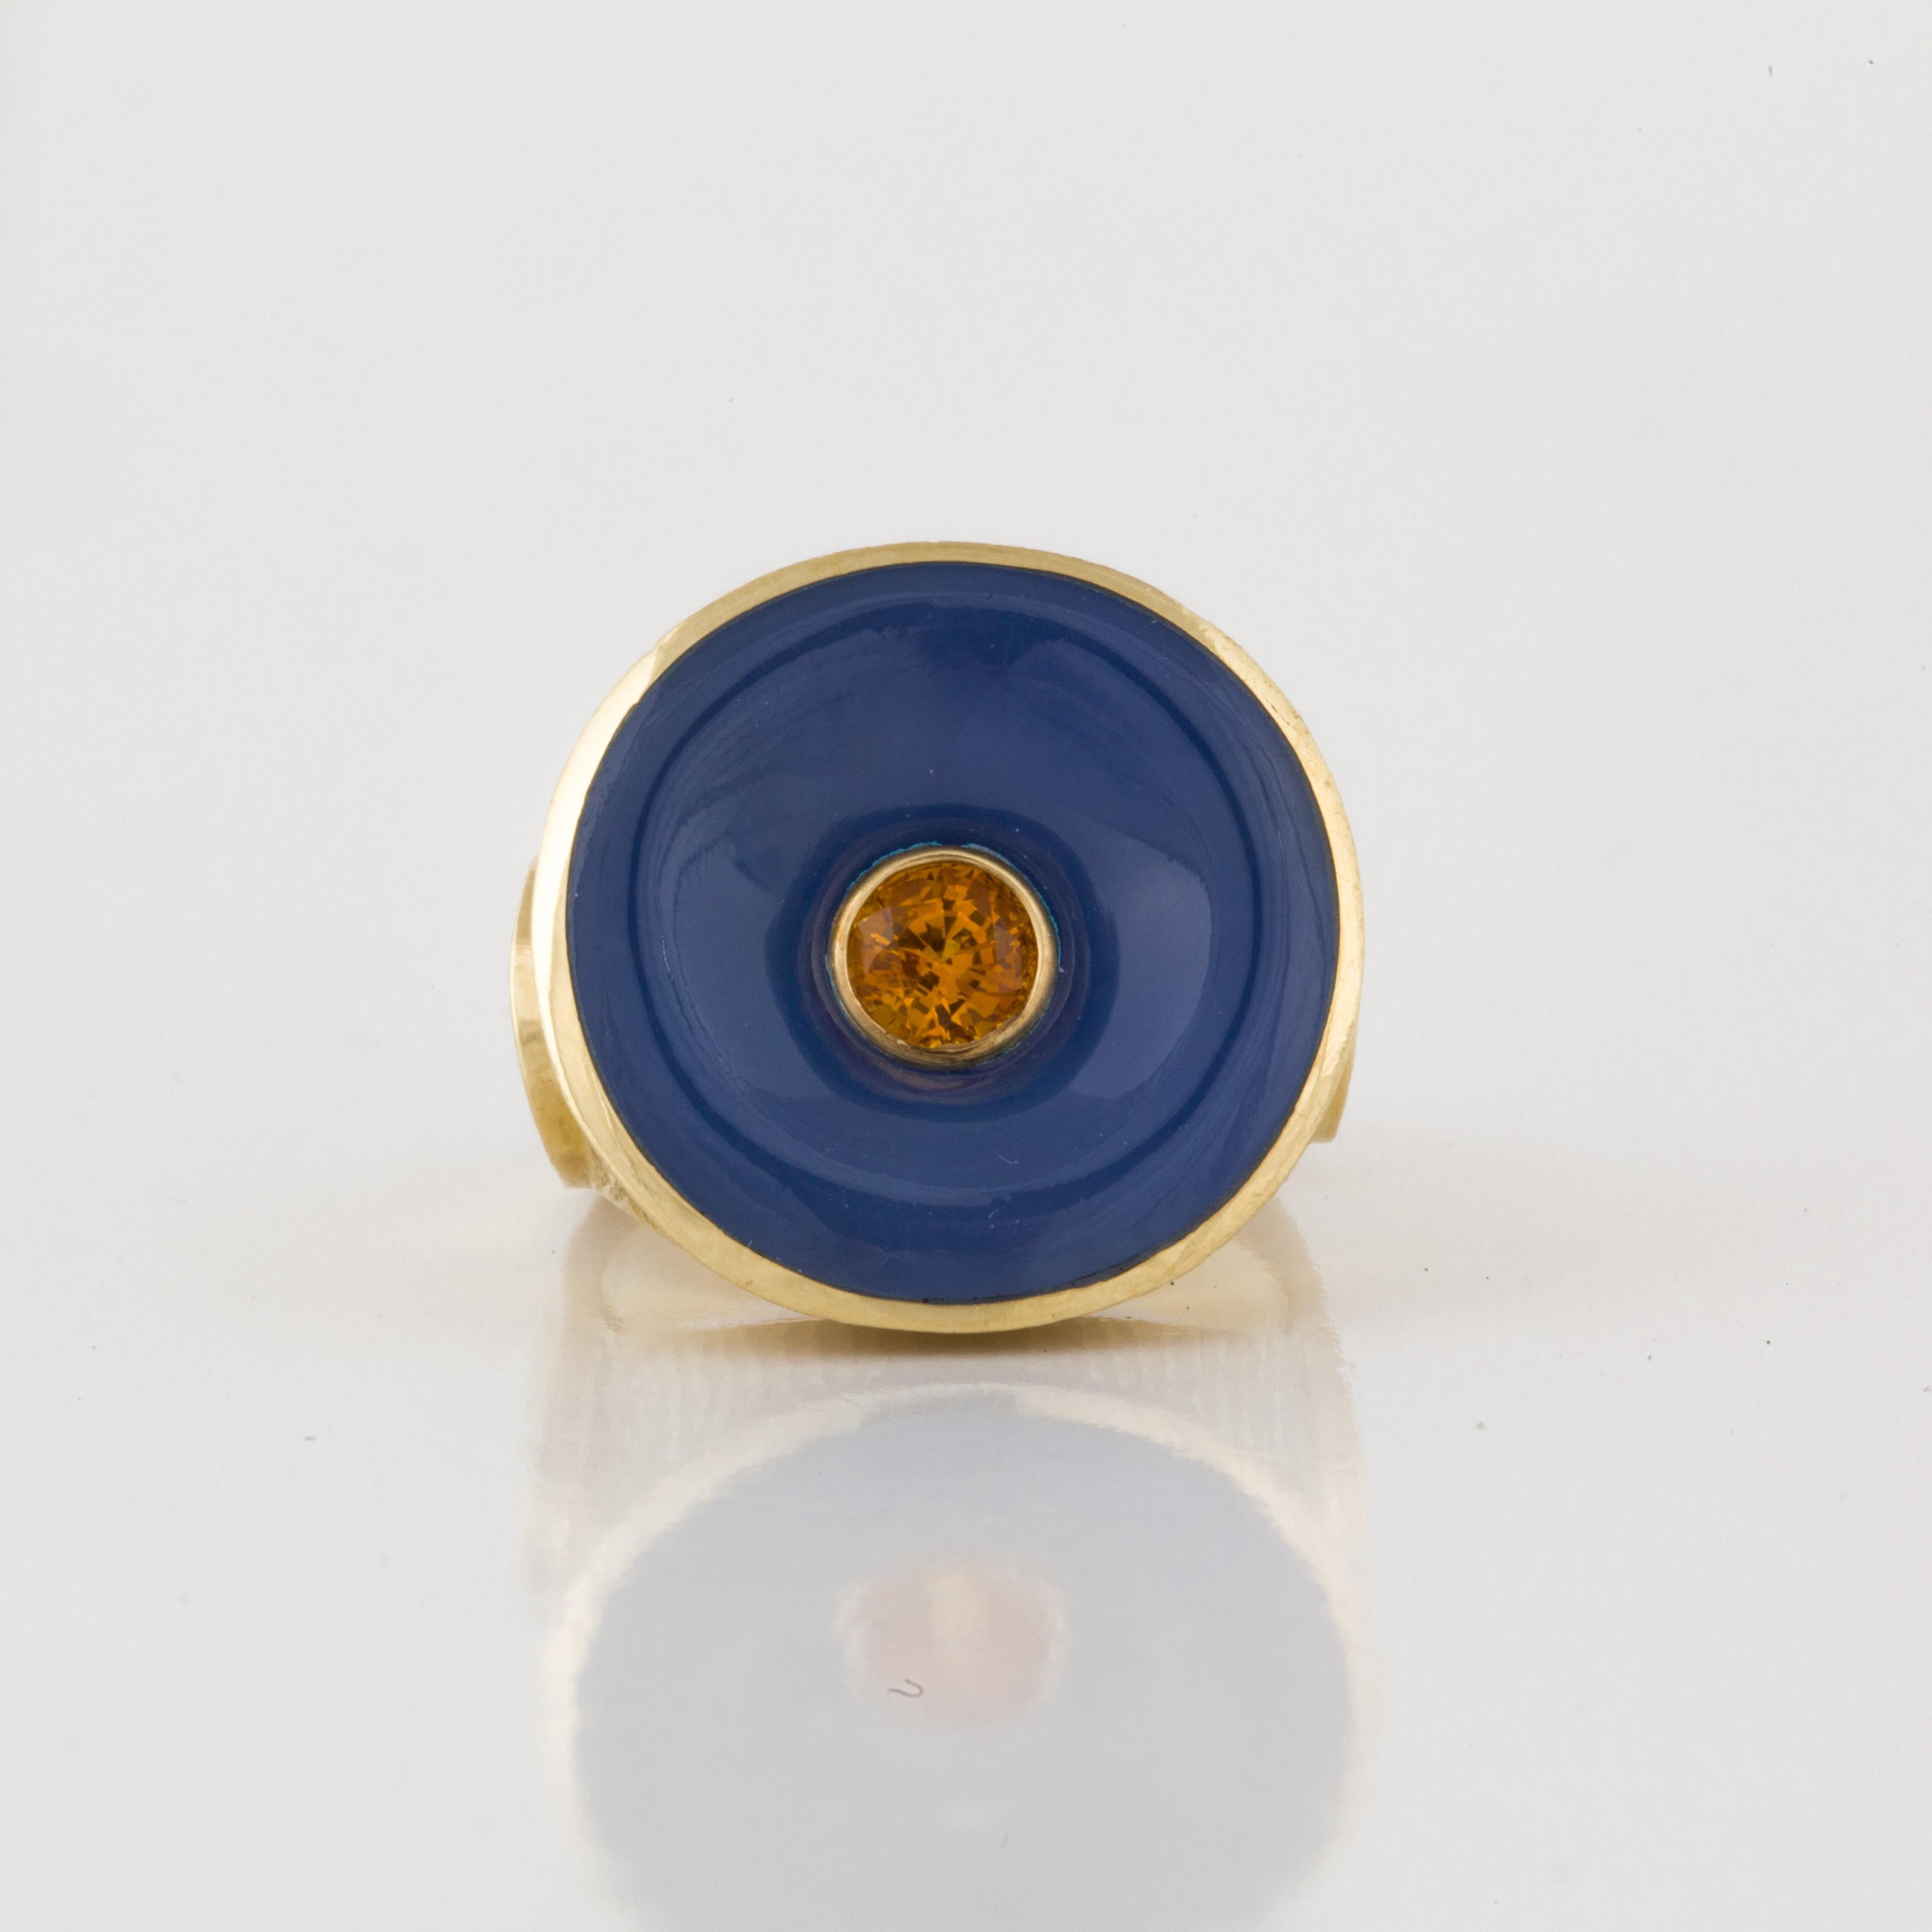 18K yellow gold ring featuring a funnel-shaped blue chalcedony stone with a faceted citrine in the center.  The shank is squared off at the back and has both smooth and florentine finishes.  Measures 7/8 of an inch across the top.  Ring is a size 7.